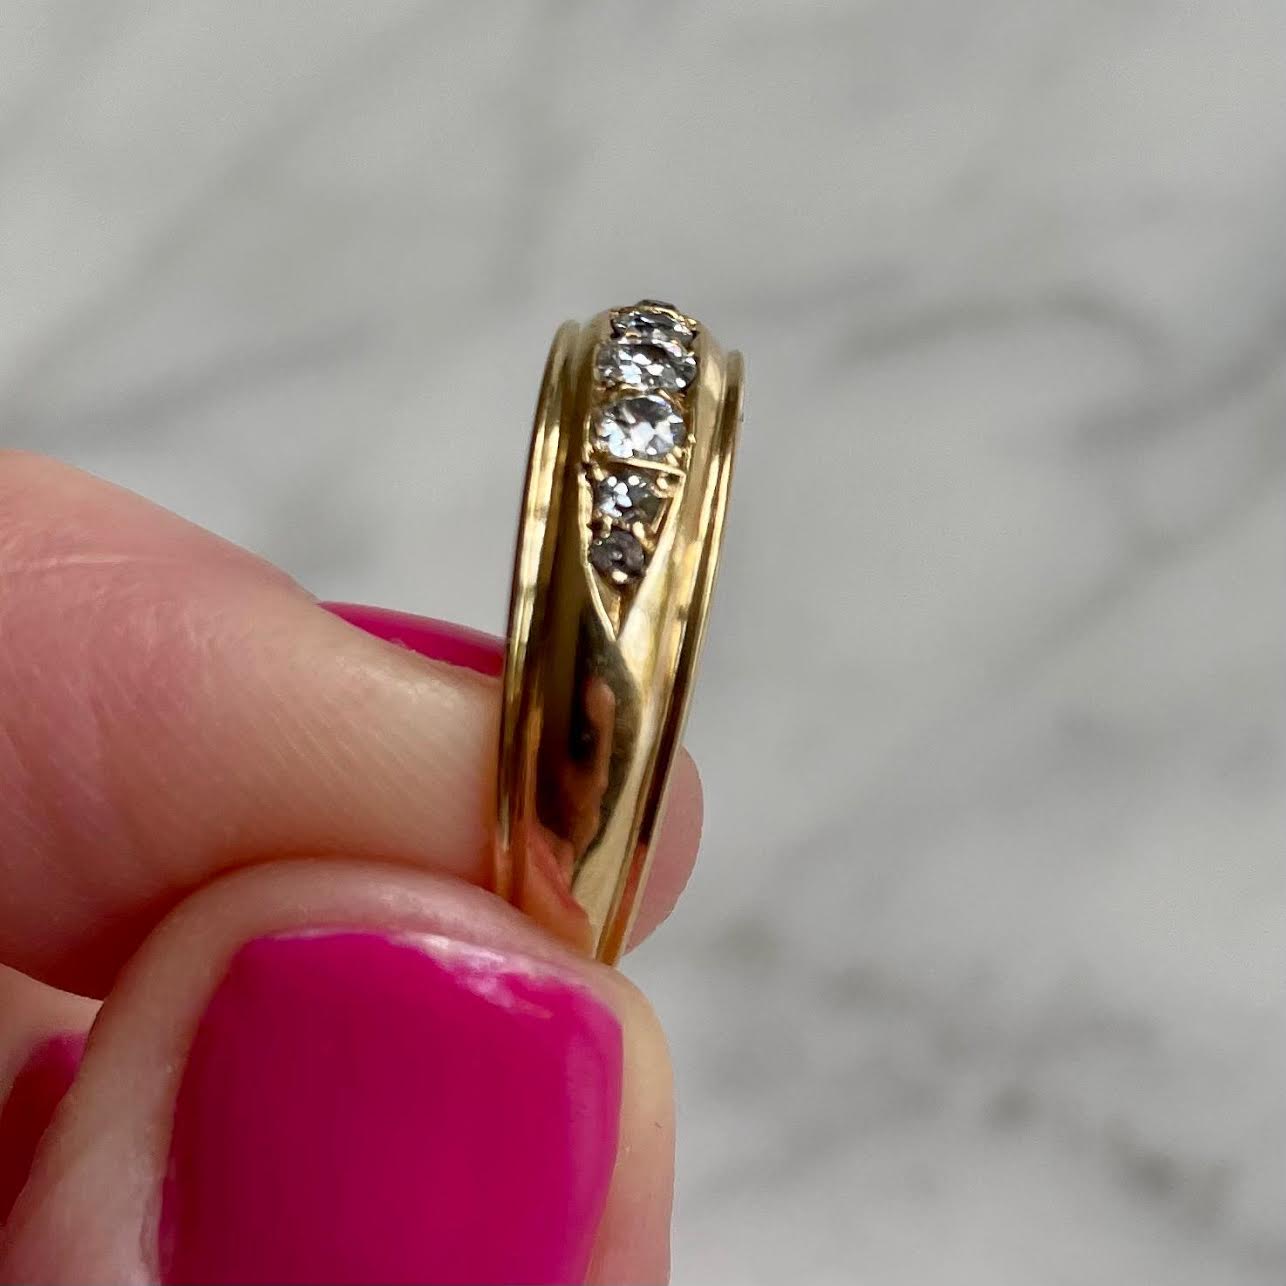 Late Victorian 18k Gold Ring with 7 Old Cut Diamonds Chester 1900